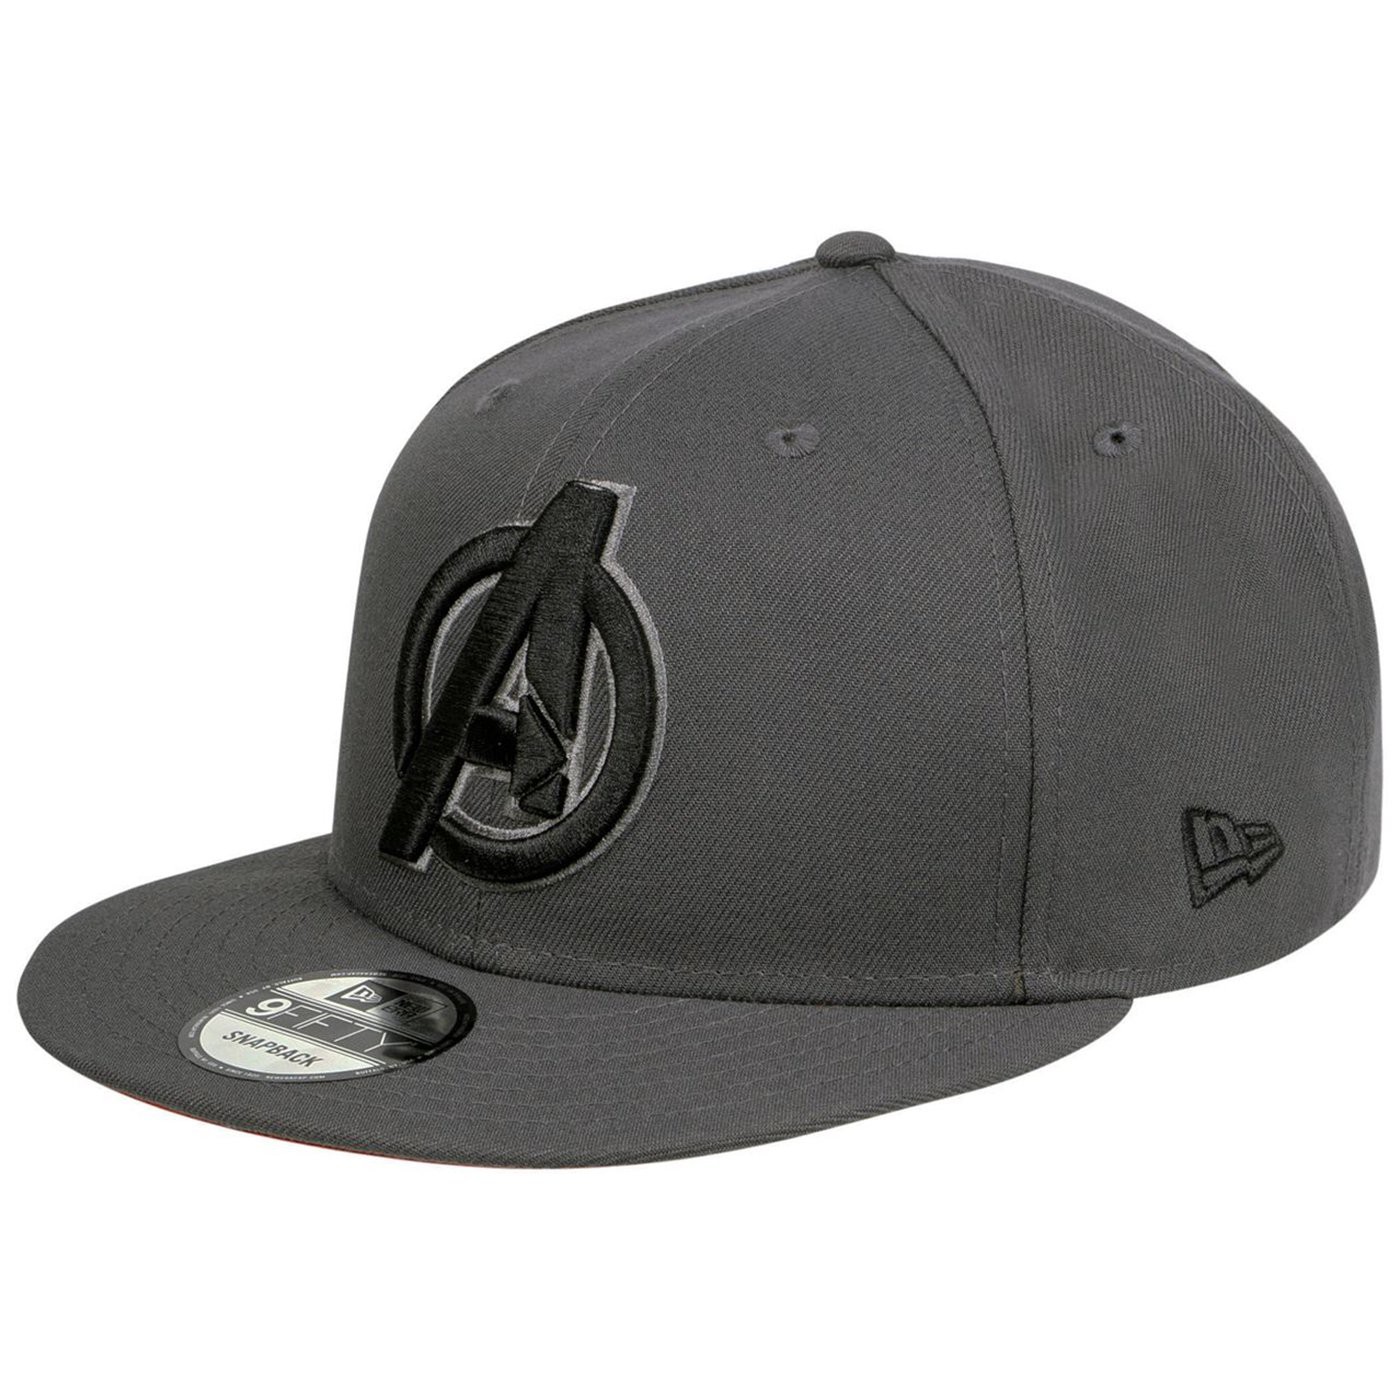 Avengers Endgame Movie "A" 9Fifty Adjustable Hat